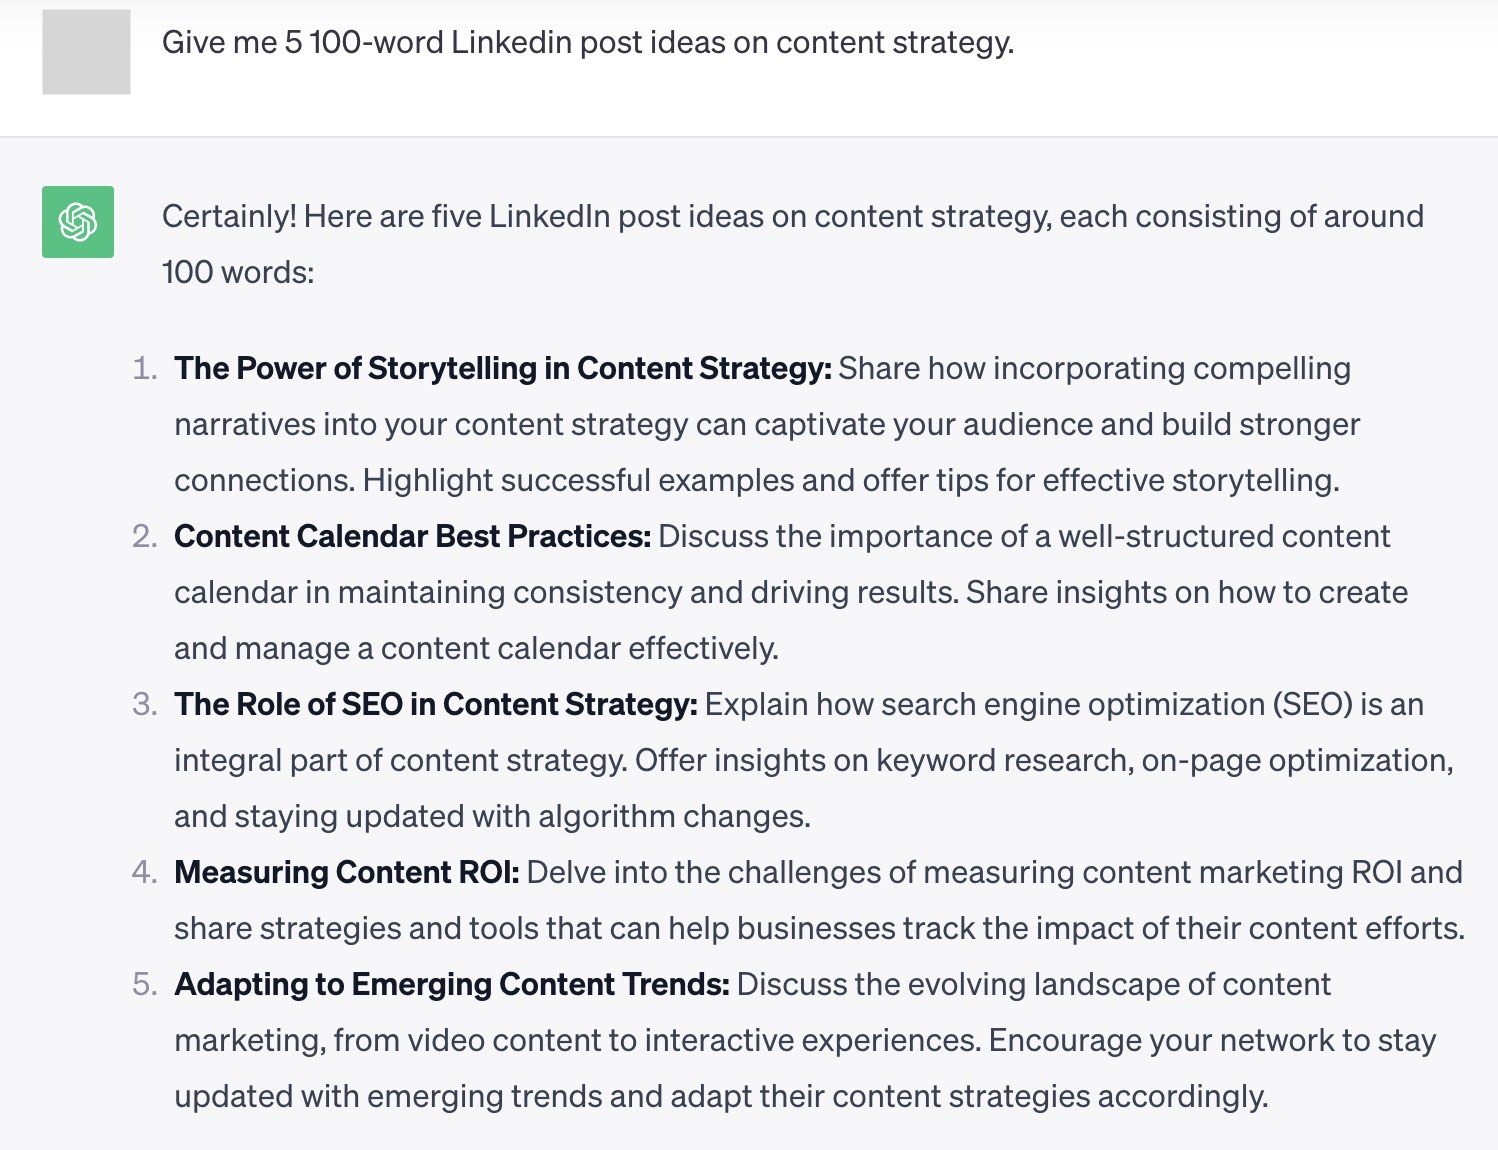 ChatGPT's response to "Give me 5 100-word LinkedIn post ideas on content strategy" prompt